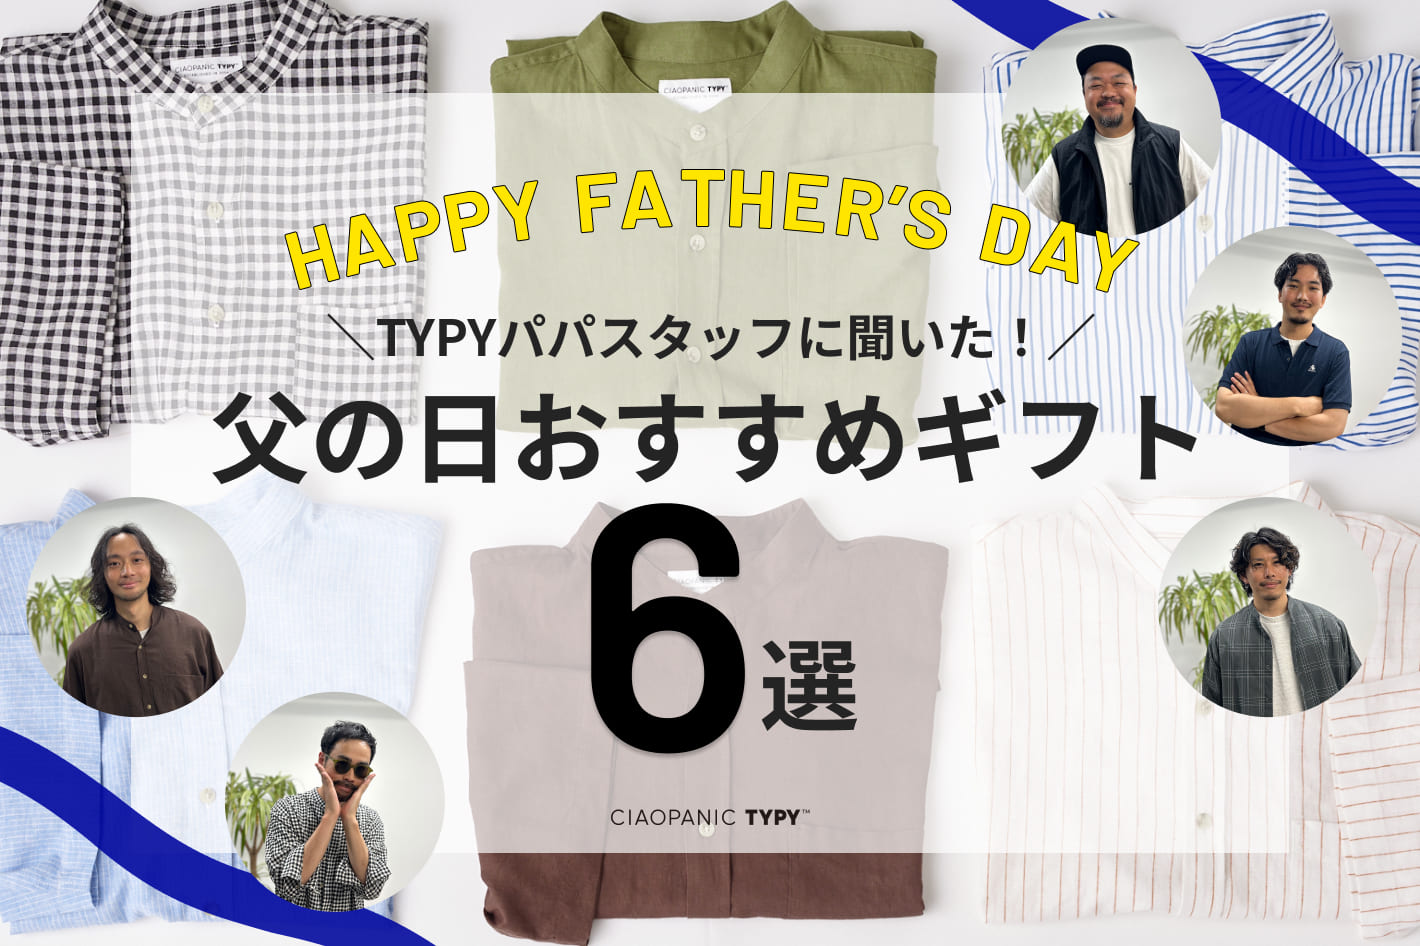 CIAOPANIC TYPY ＼HAPPY FATHER’S DAY／ おすすめギフト6選